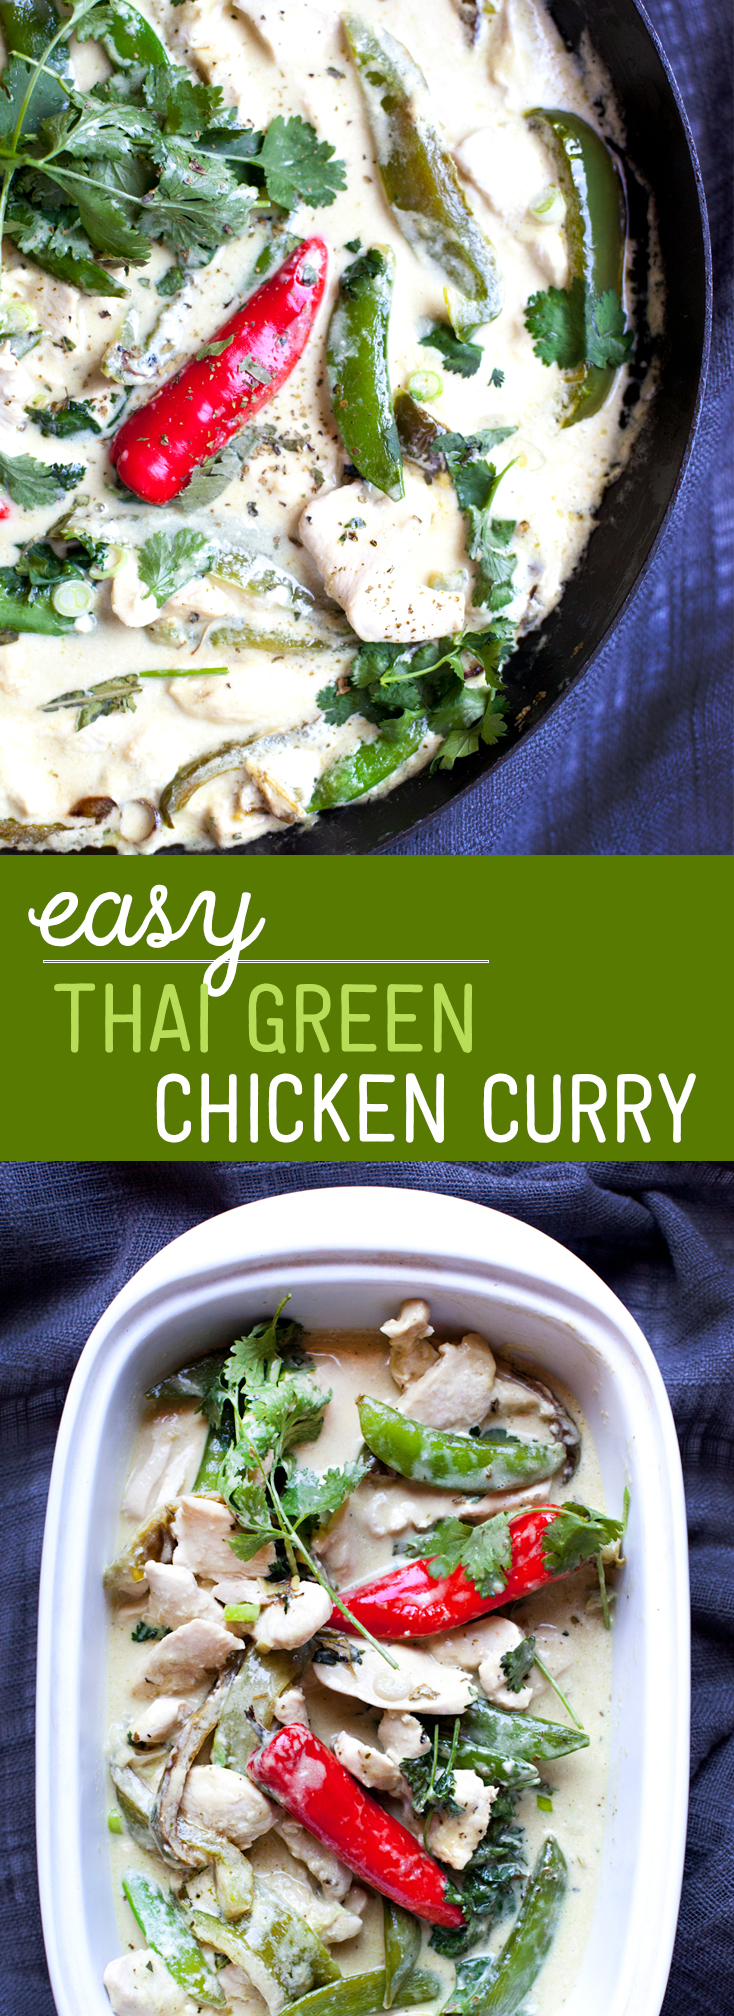 Easy Thai Green Chicken Curry - Make it in 20 Minutes